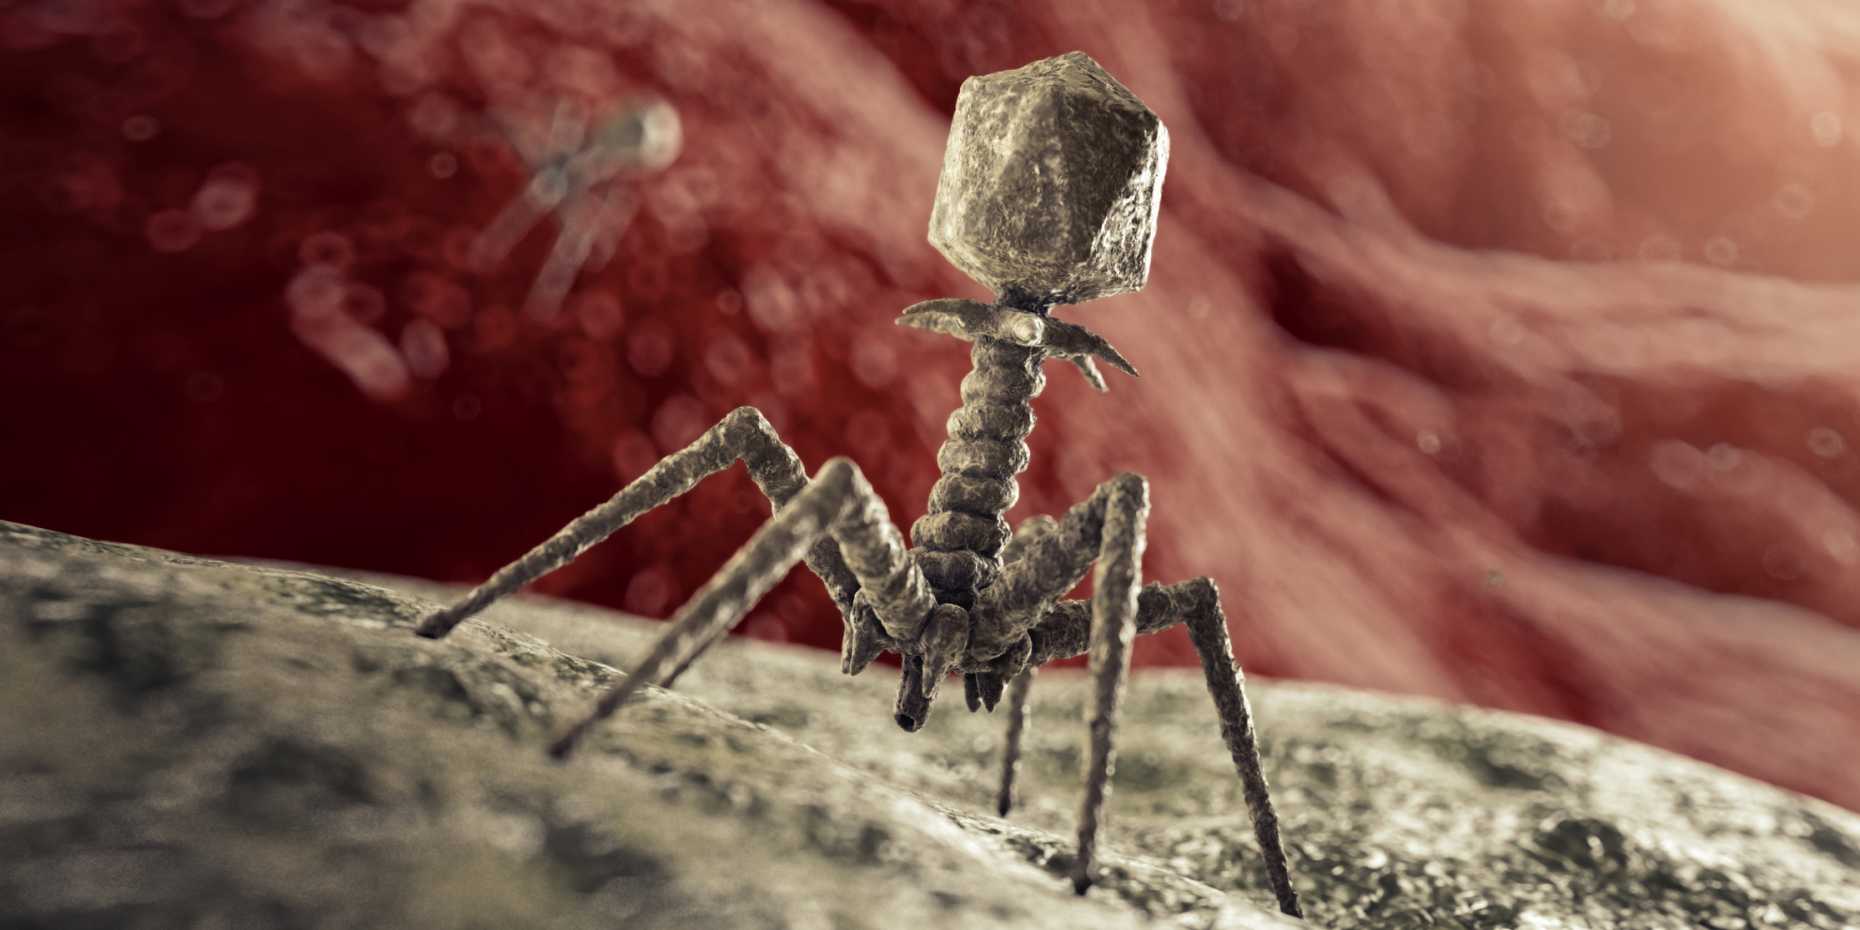 Illustration of bacteriophages